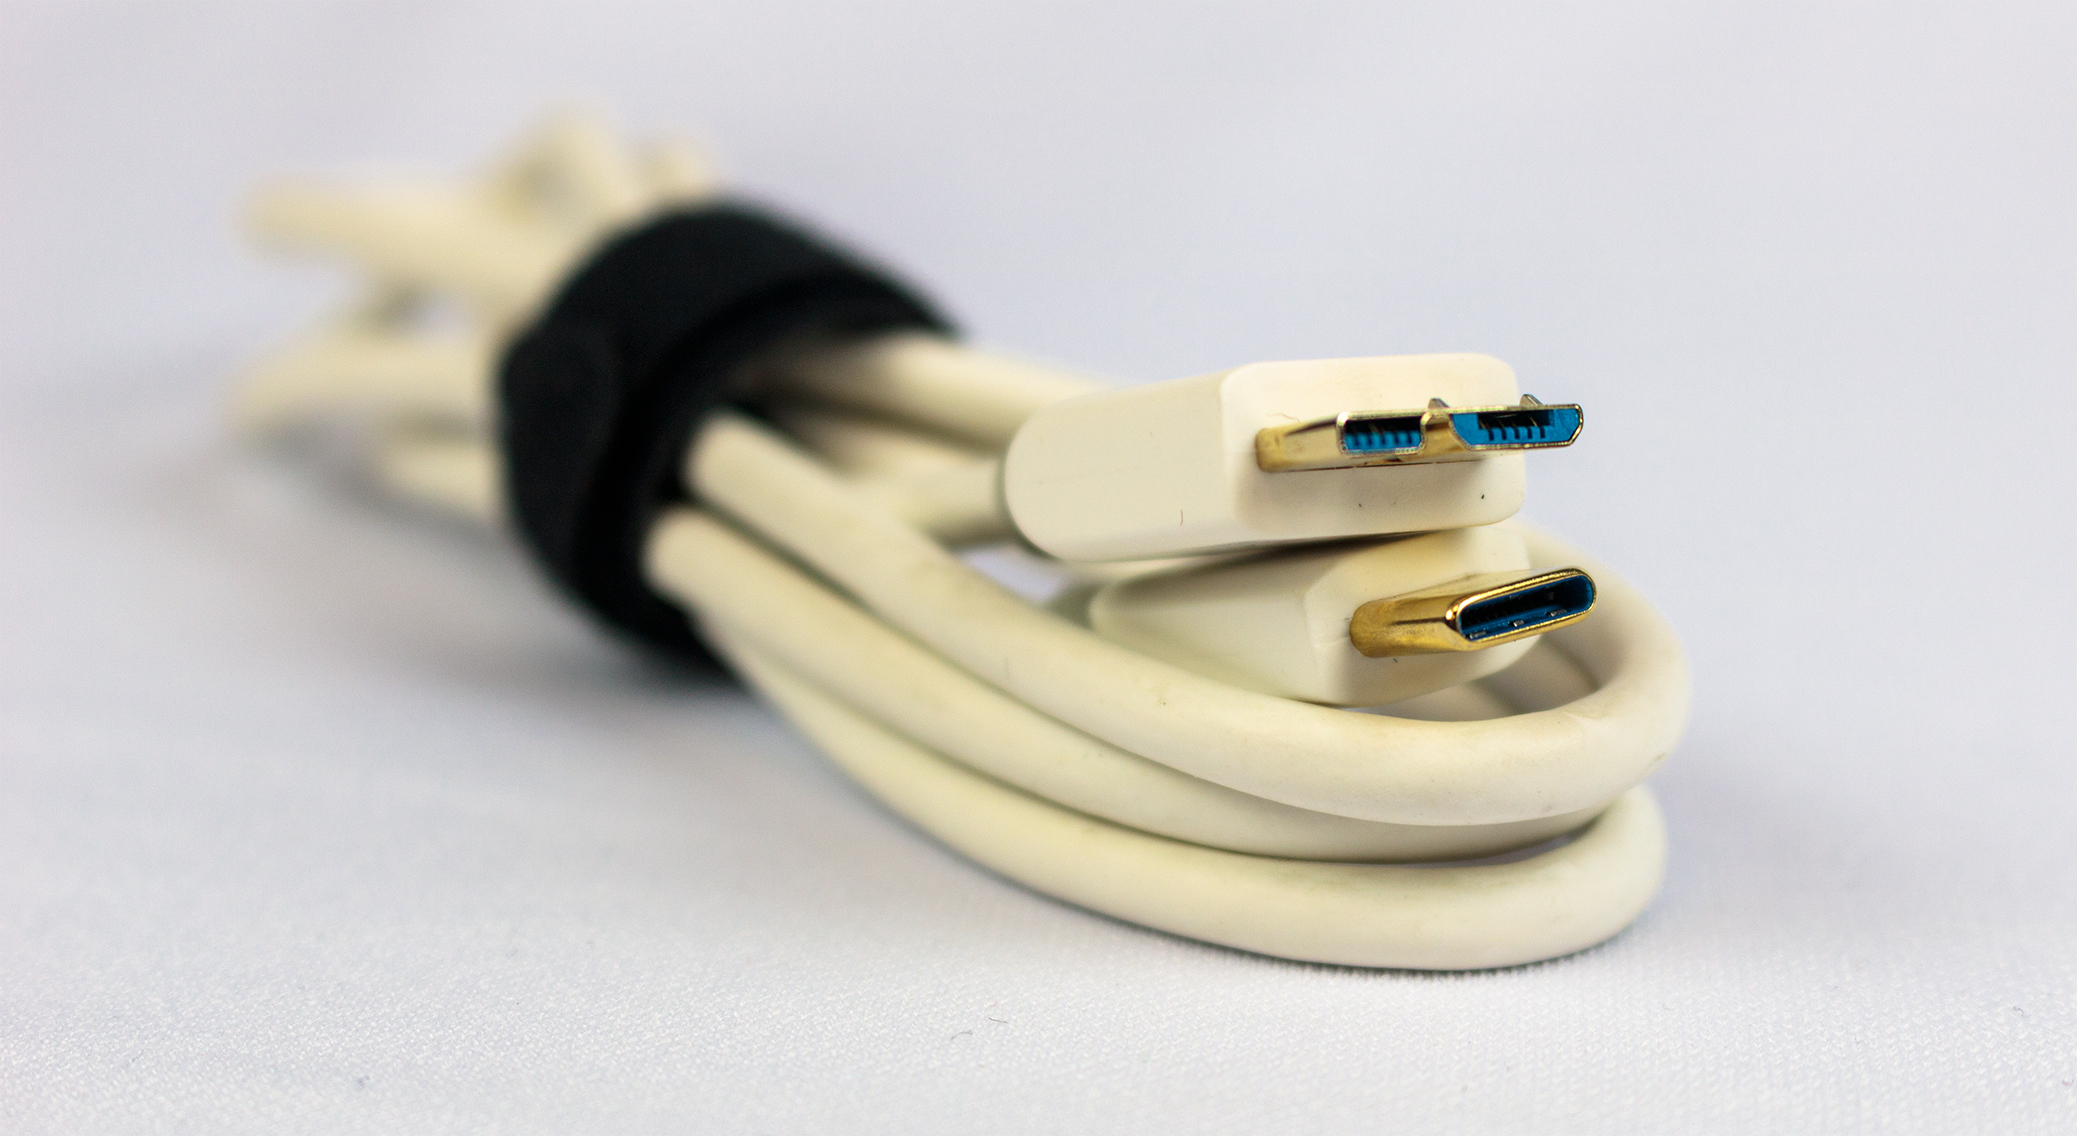 USB C to Micro-B cable